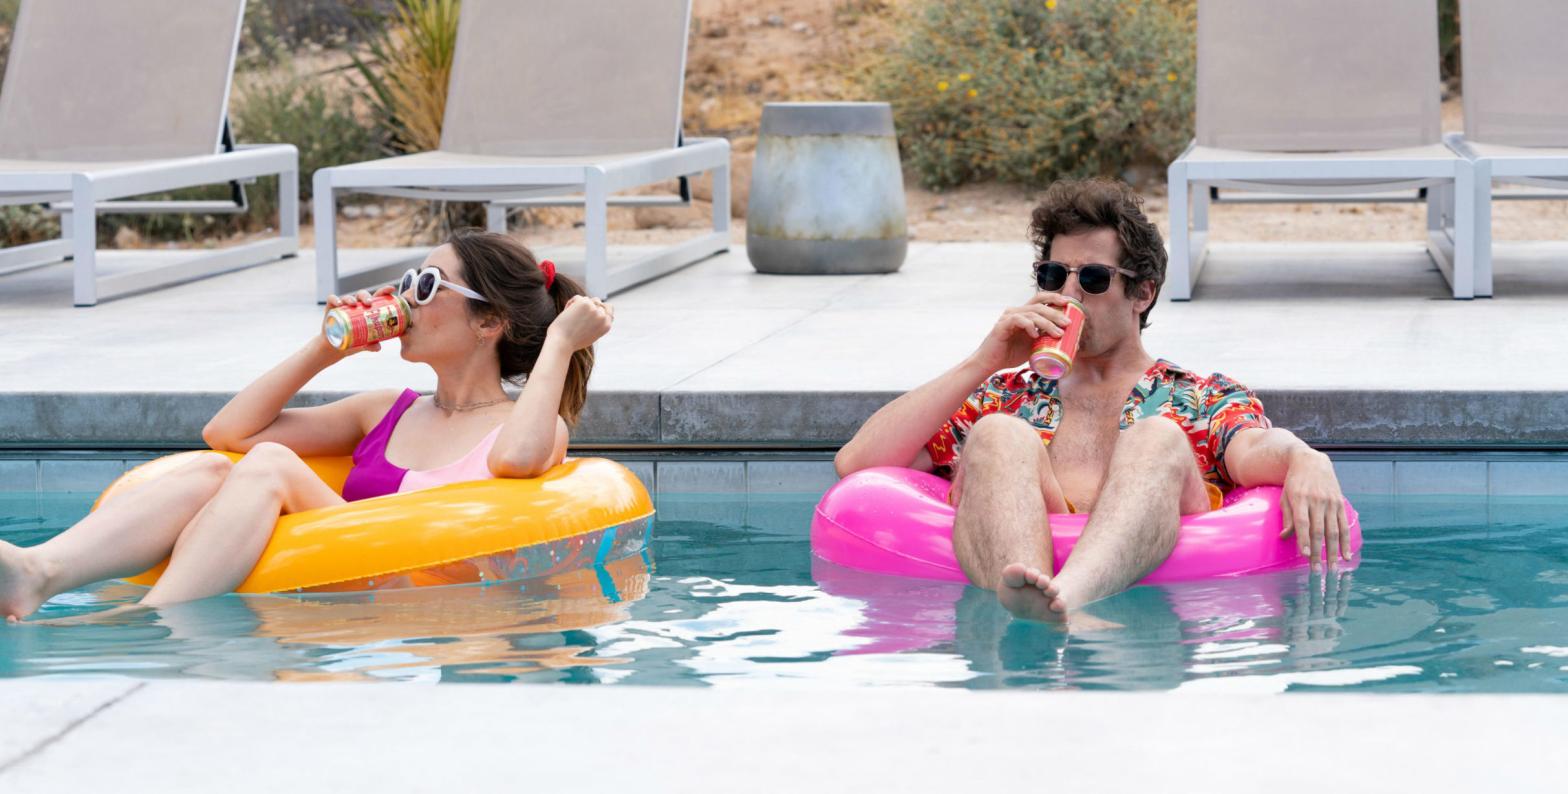 Crack a beer, jump in the pool, and stream Palm Springs this weekend. (Photo: Jessica Perez/Hulu)